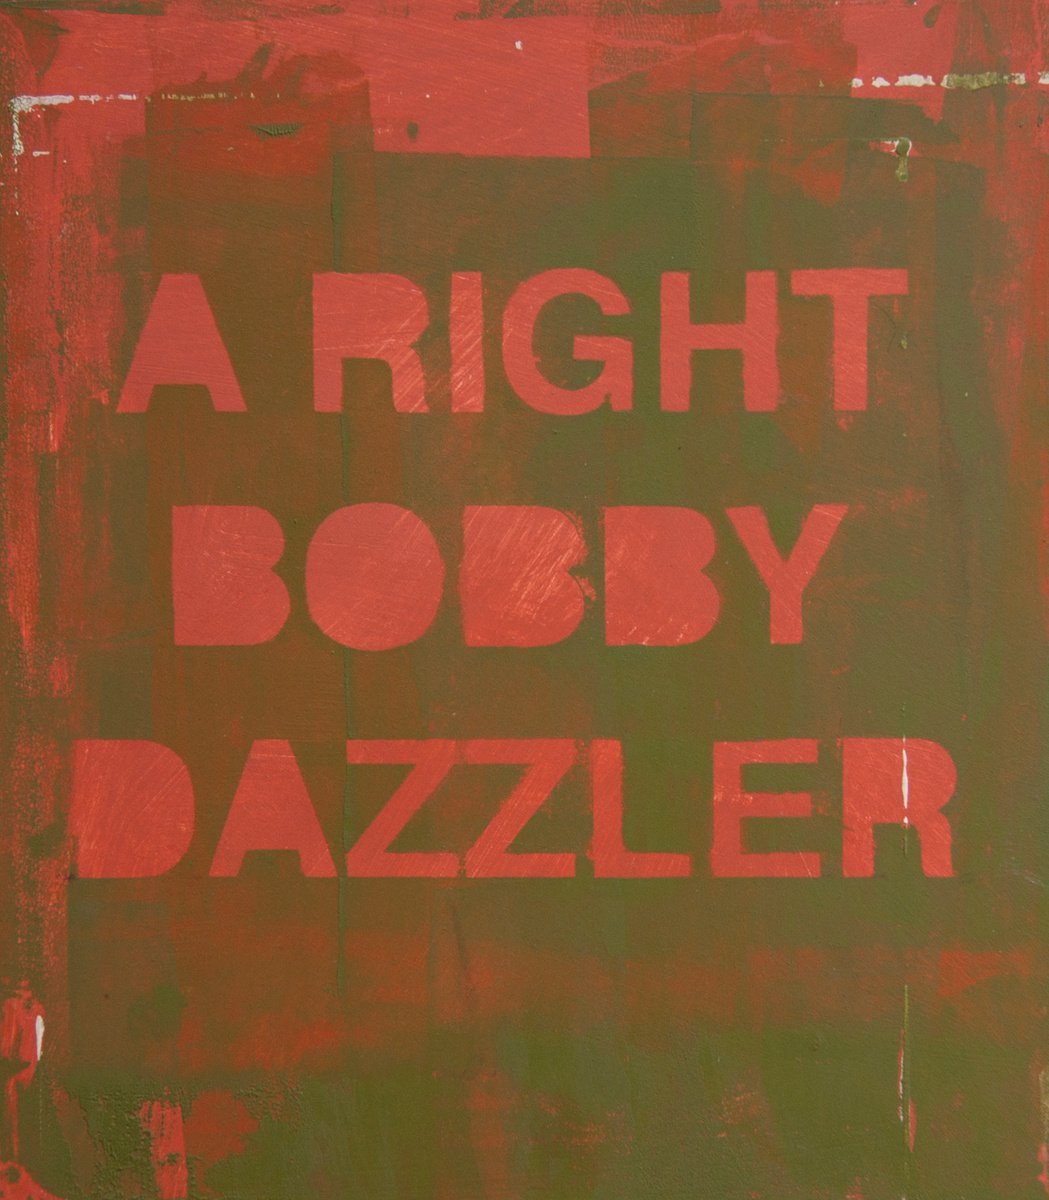 a right bobby dazzler by Ian McKay